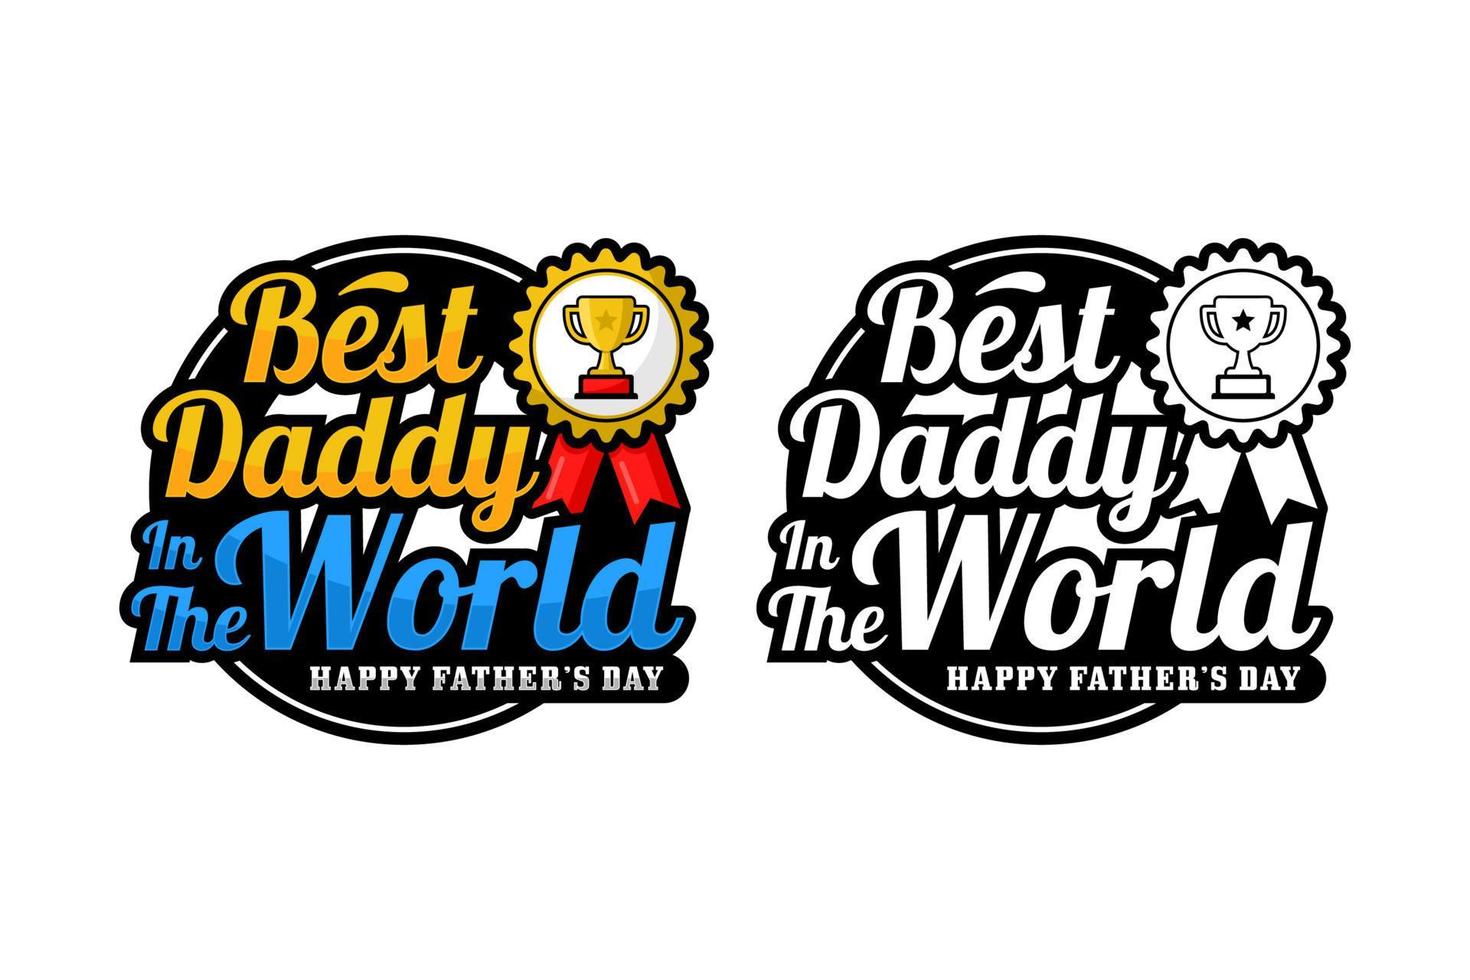 Best daddy in the world happy fathers day vector design logo